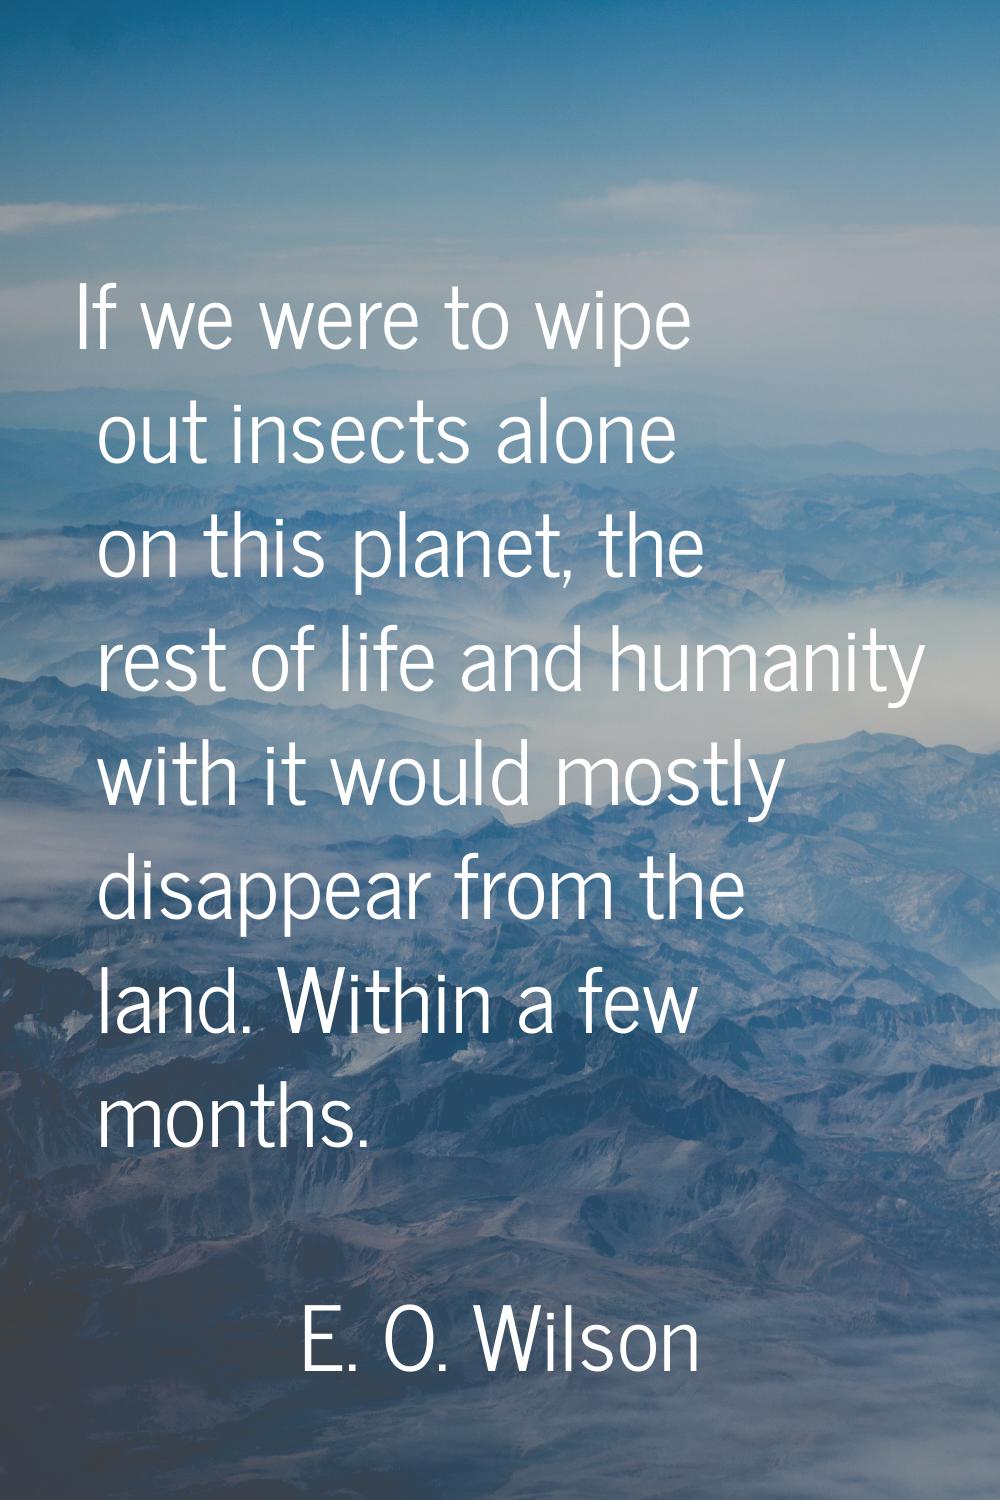 If we were to wipe out insects alone on this planet, the rest of life and humanity with it would mo